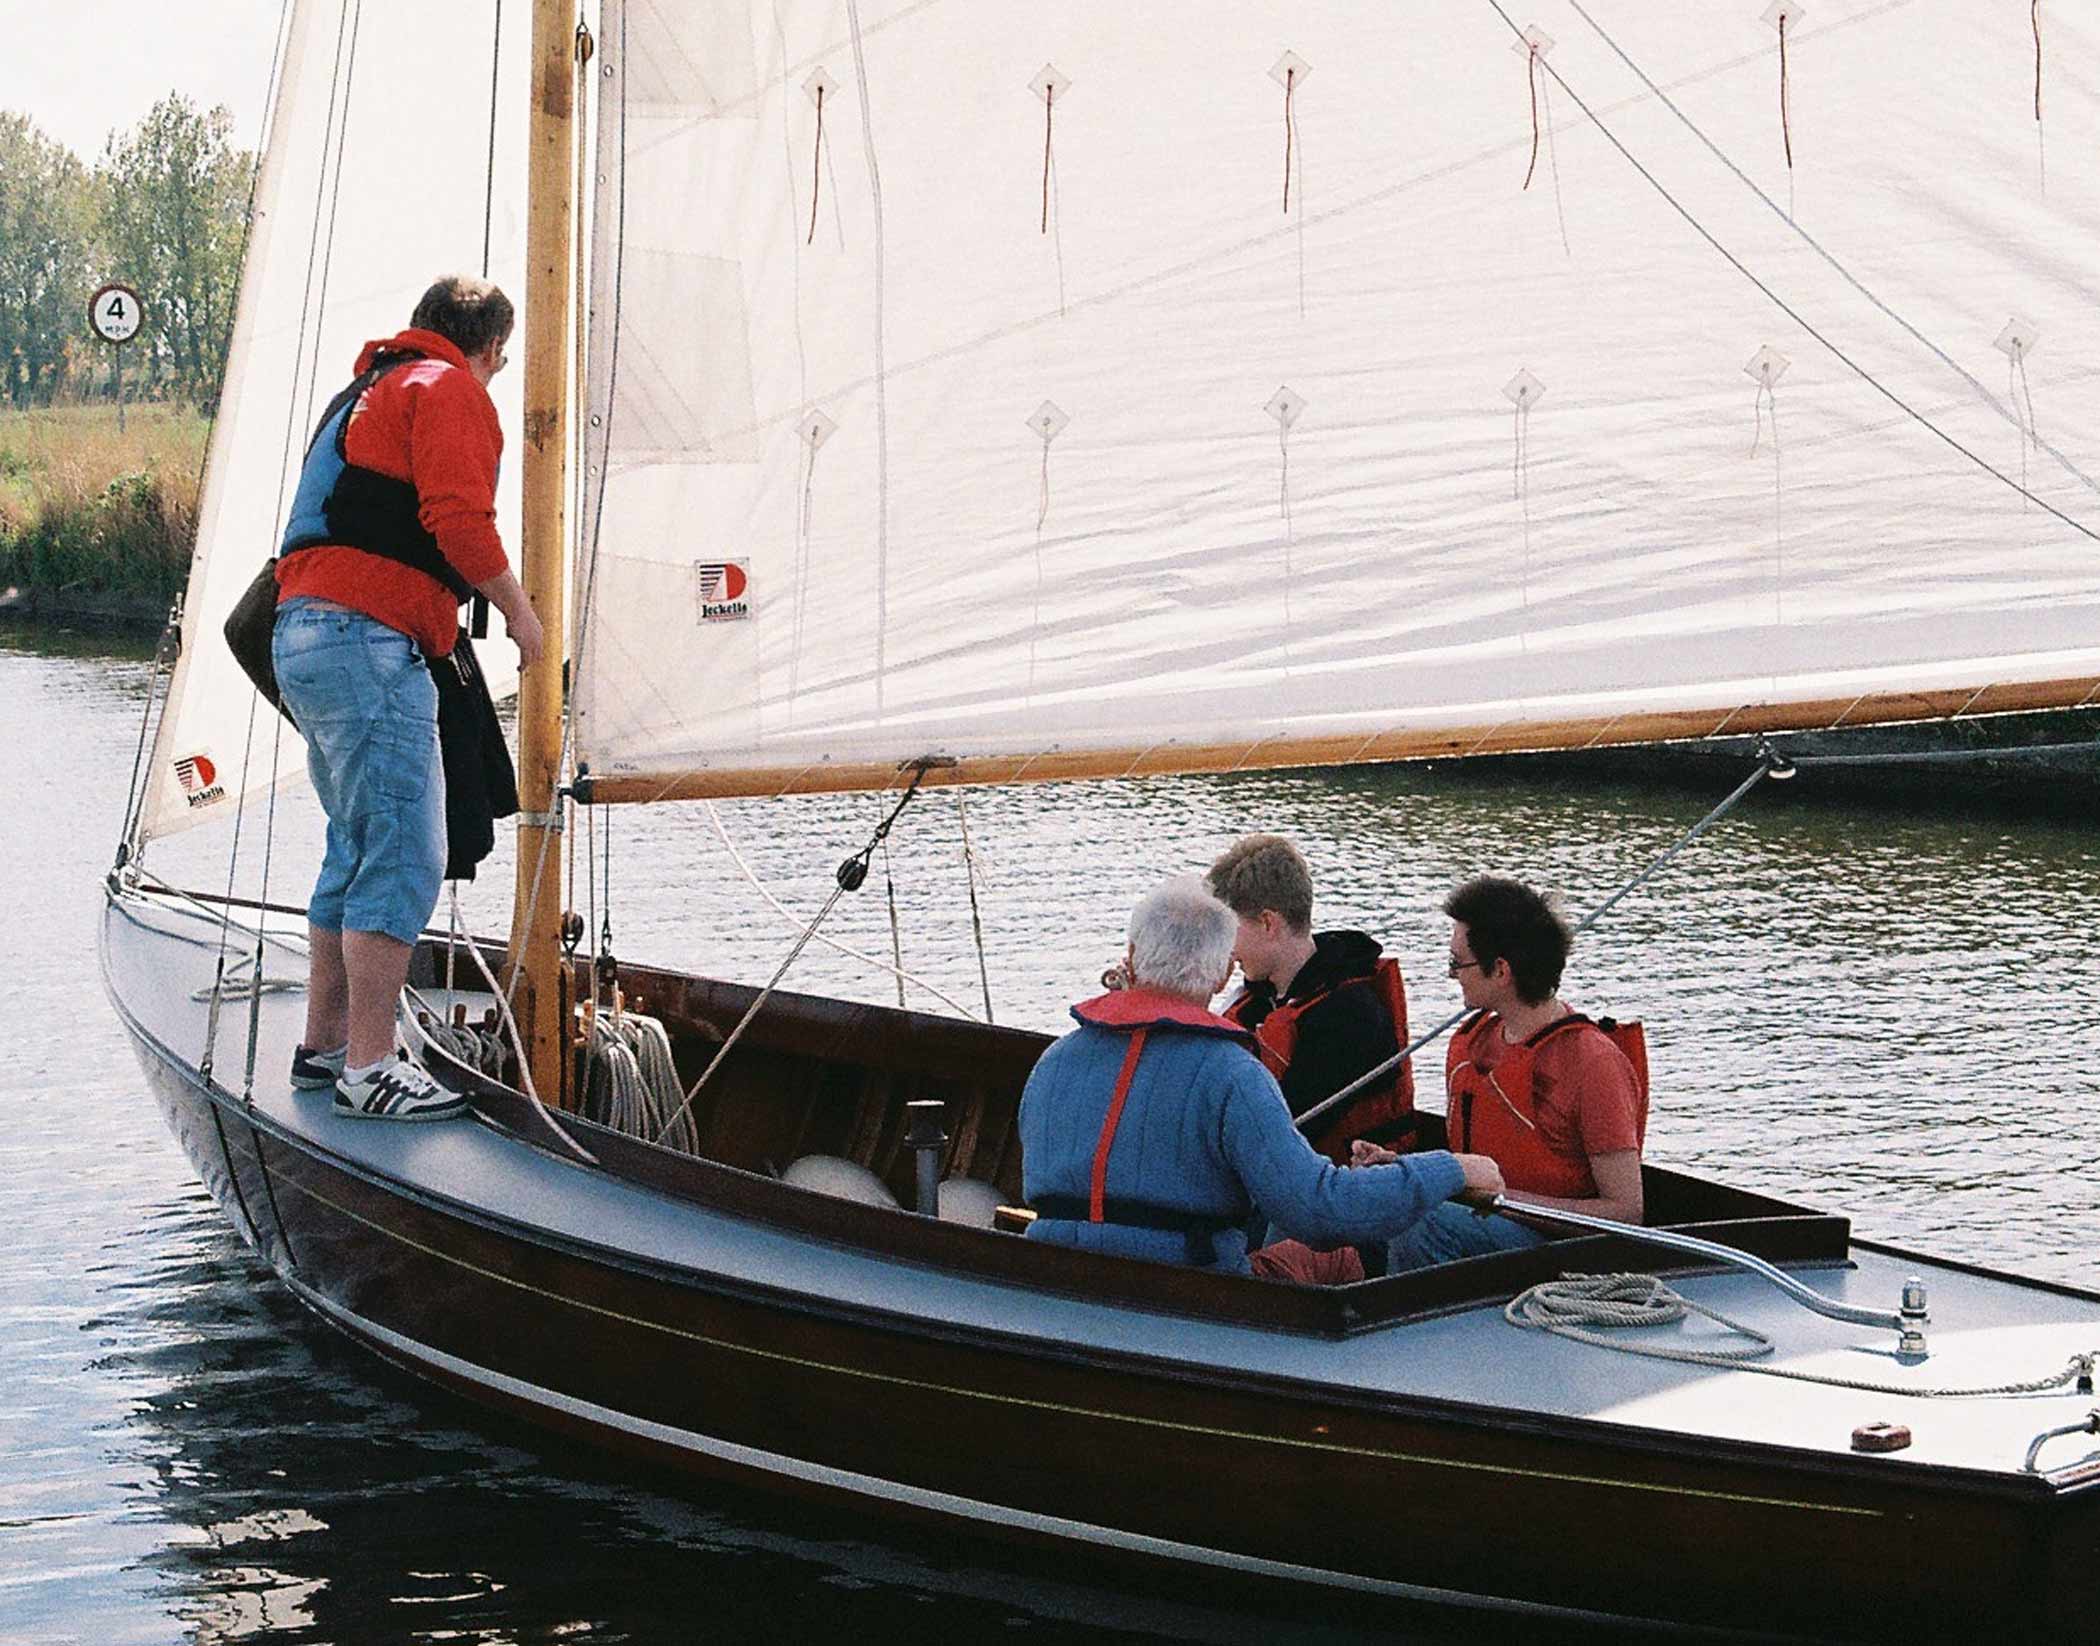 A family onboard a wooden half-decker ready to sail on the Norfolk Broads